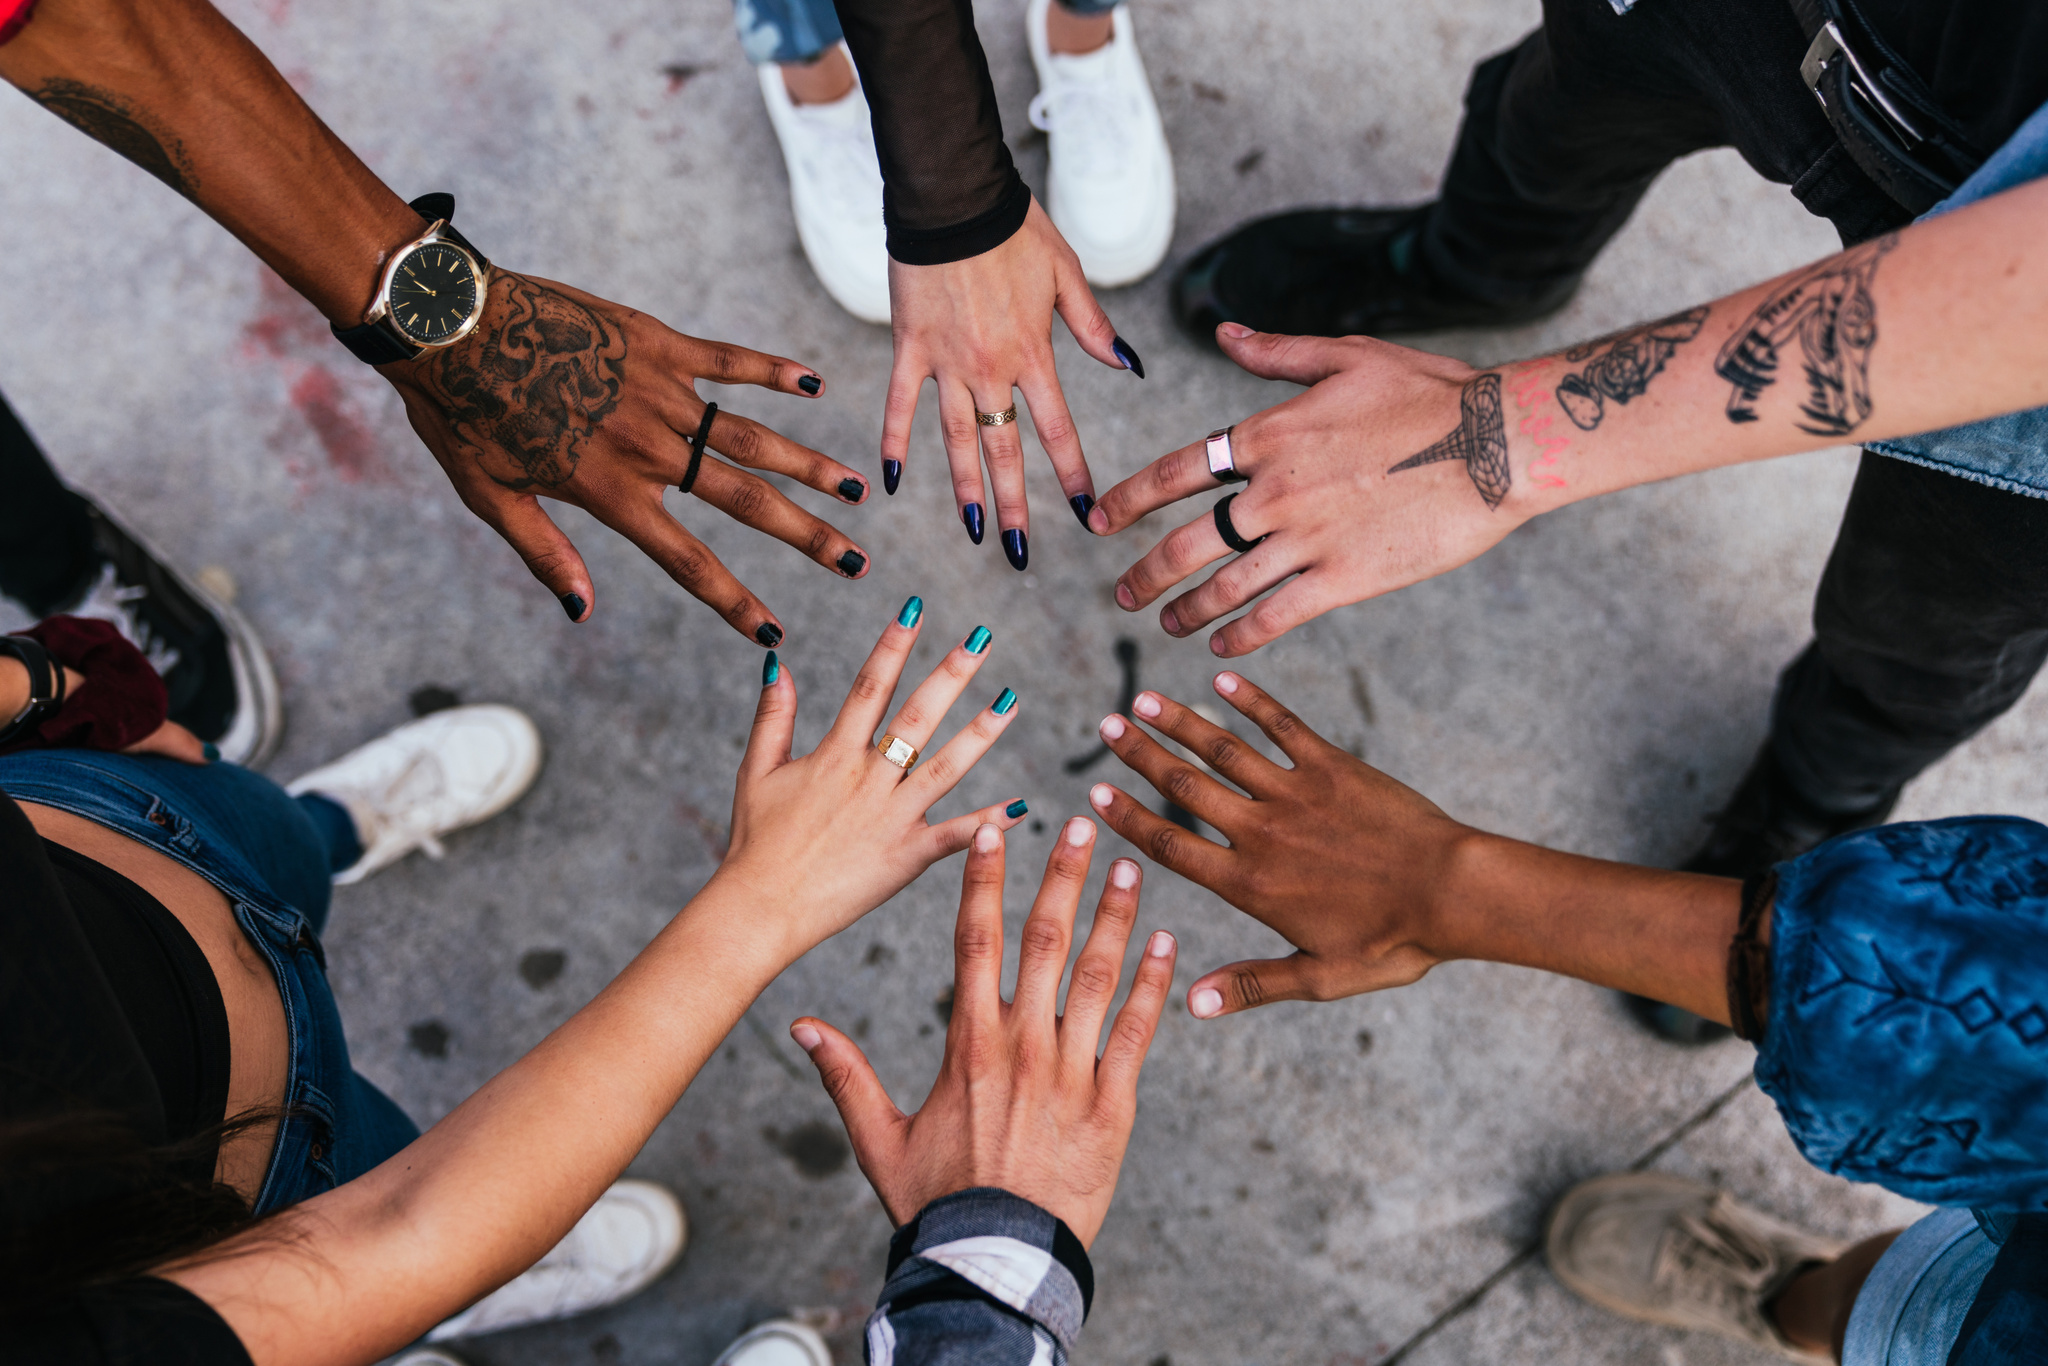 Group of five hands joining together in the center of the photo.